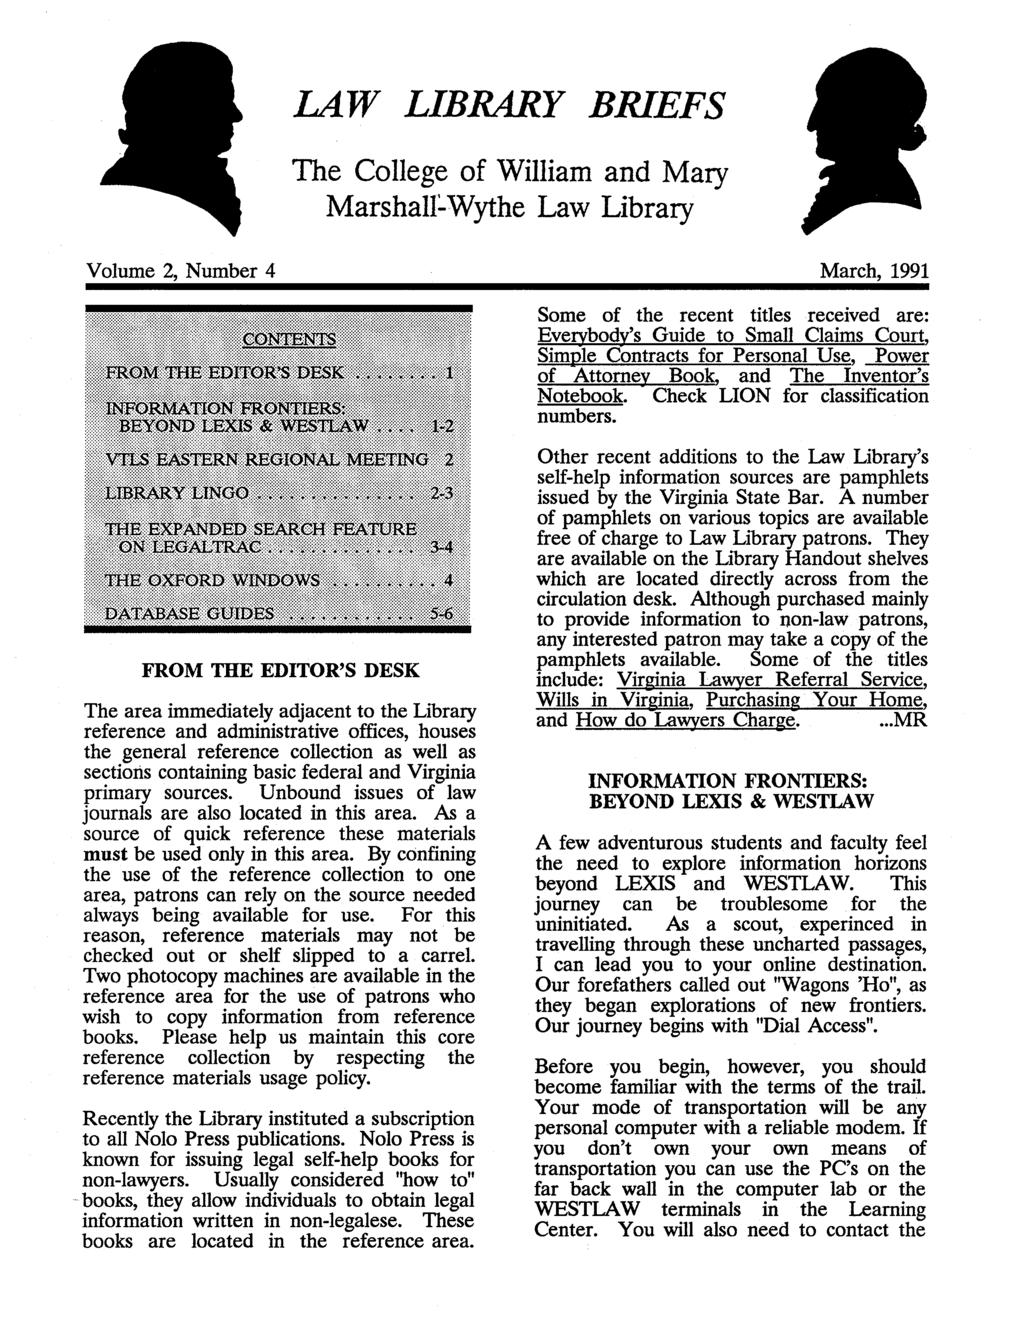 LAW LIBRARY BRIEFS The College of William and Mary Marshall:'Wythe Law Library Volume 2, Number 4 March, 1991 Some of the recent titles received are: Evetybody's Guide to Small Claims Court, Simple